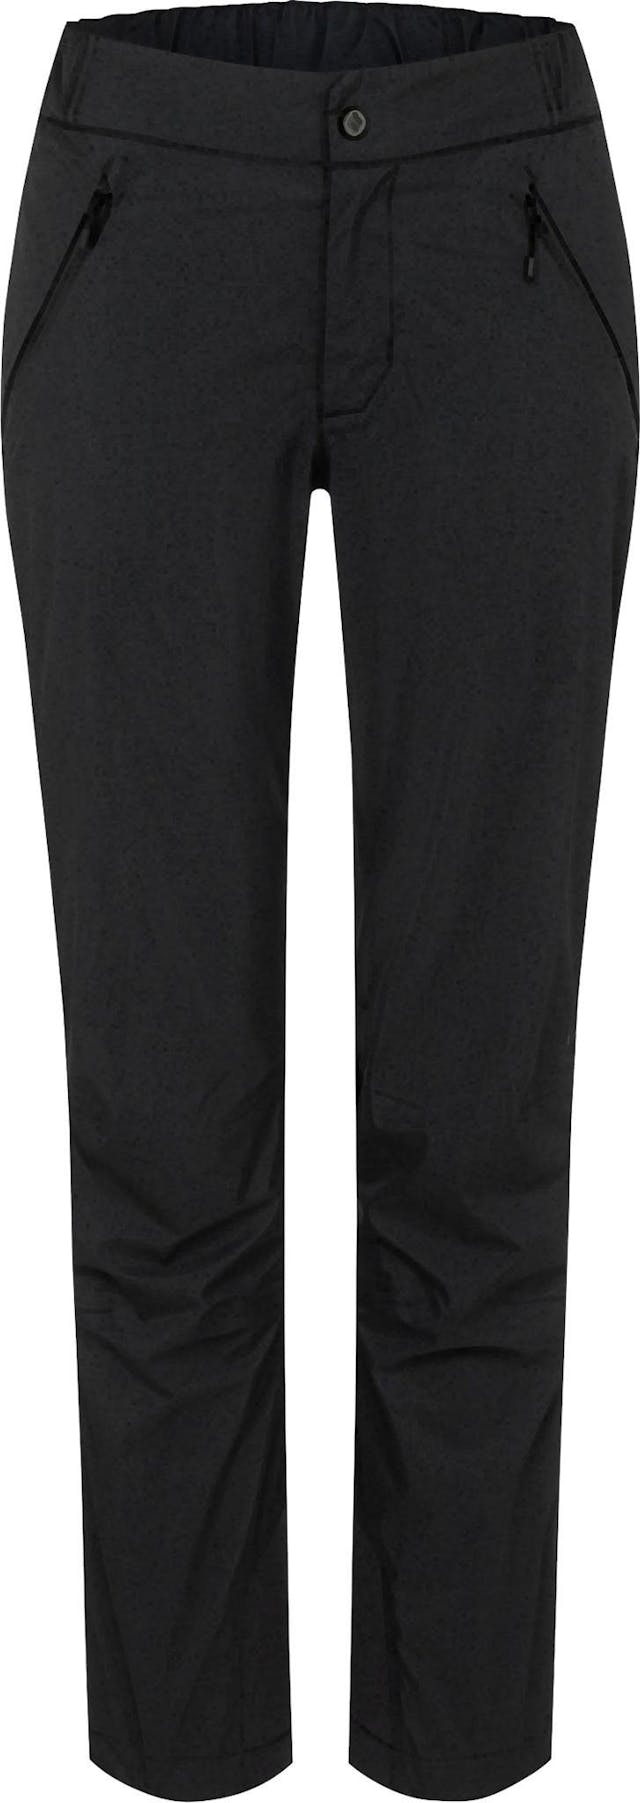 Product image for Highline Stretch Pants - Women's